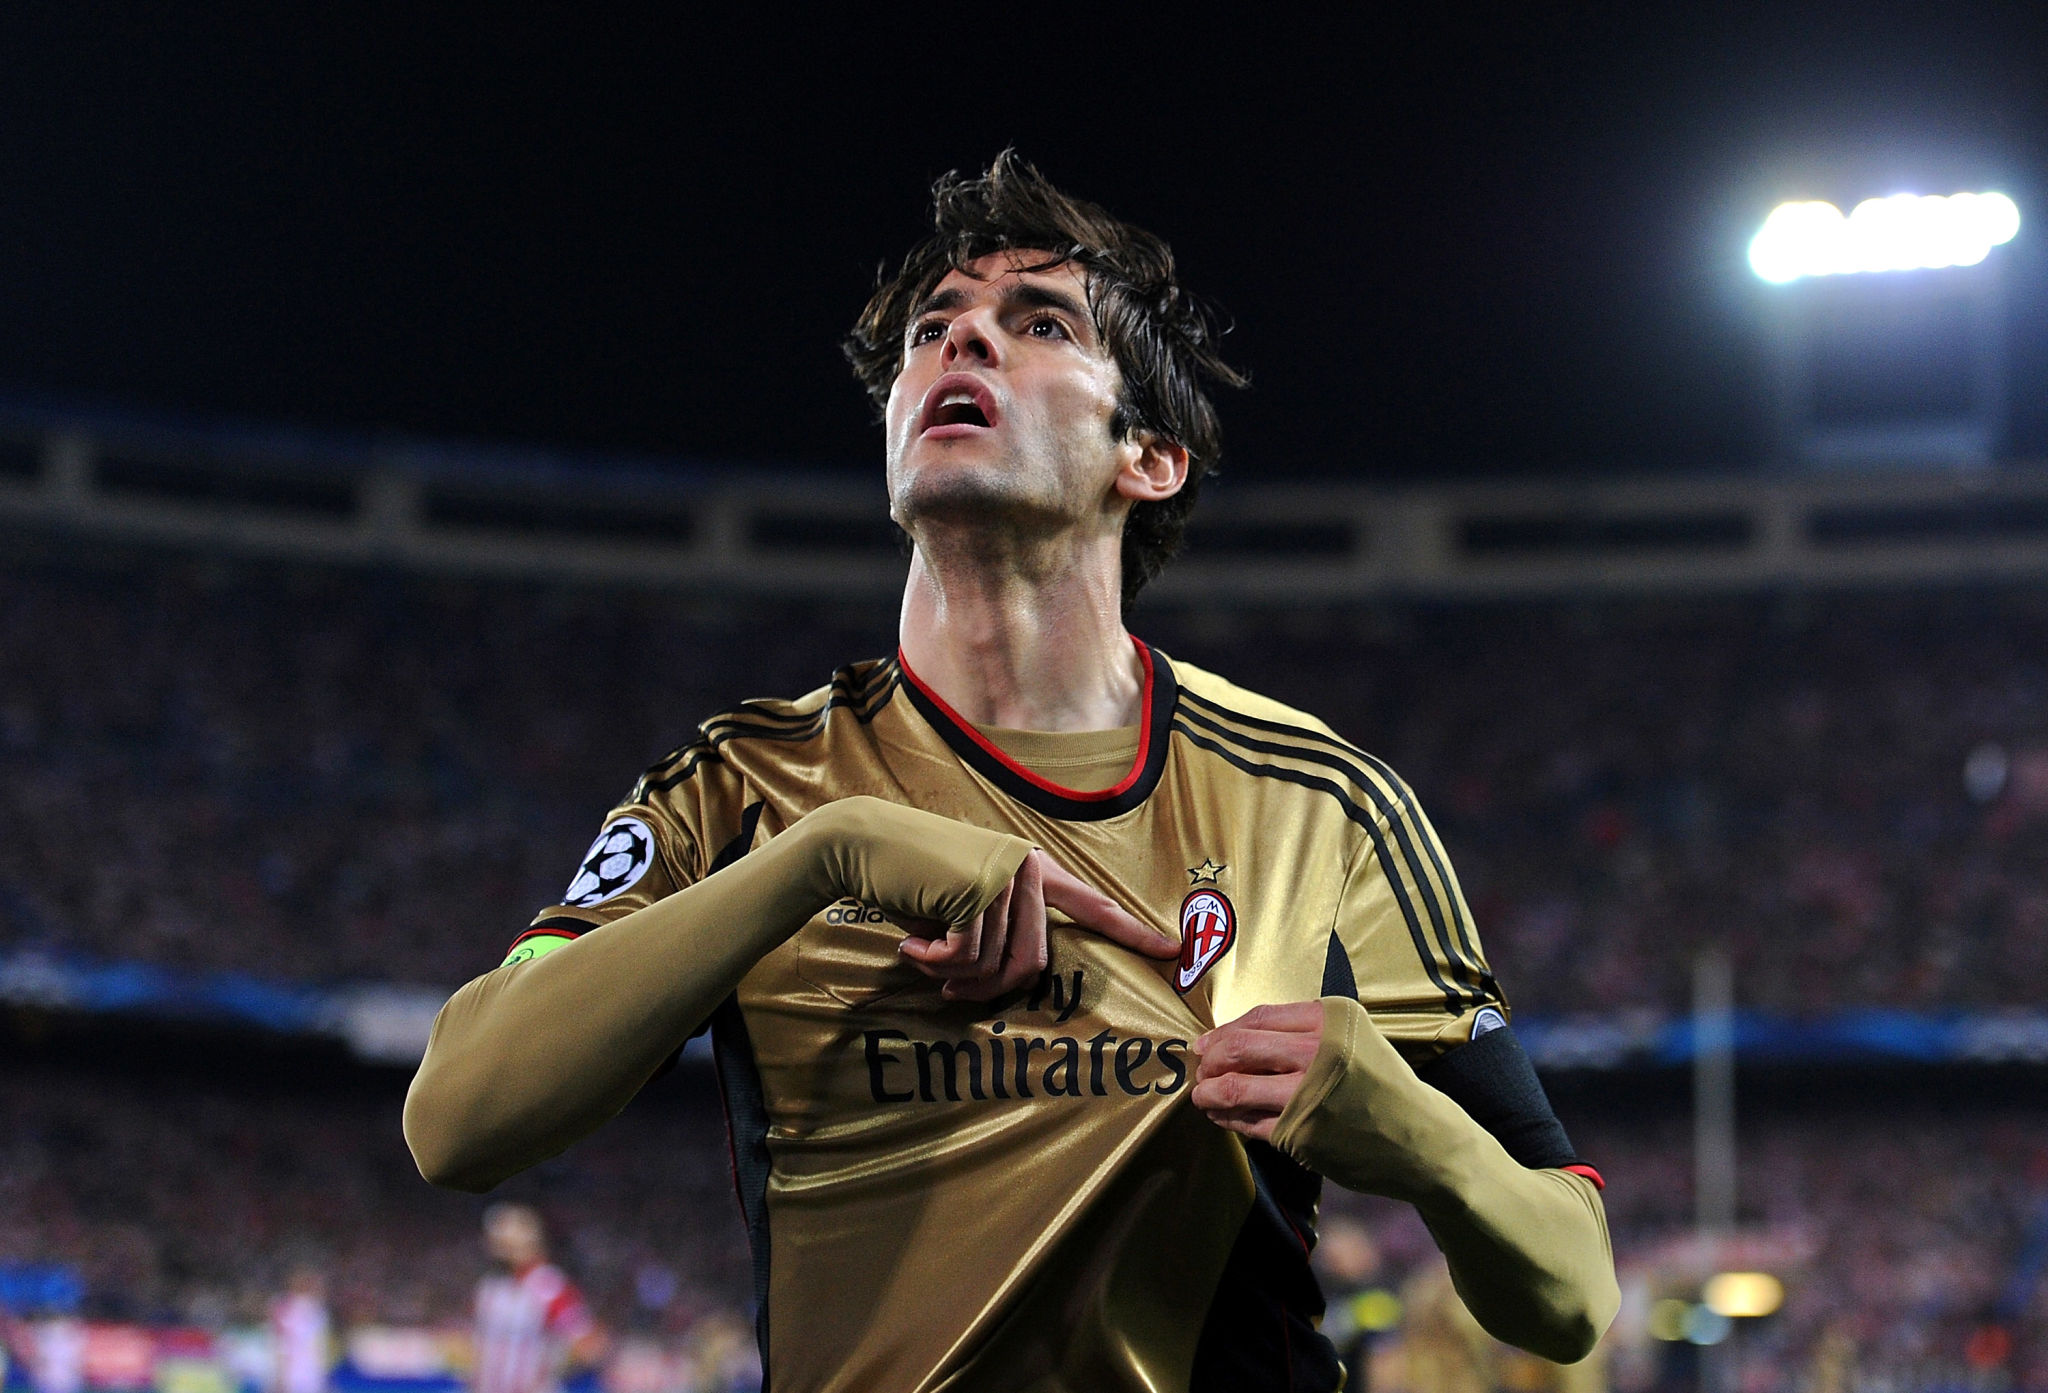 Kaká wallpapers for desktop, download free Kaká pictures and backgrounds  for PC | mob.org